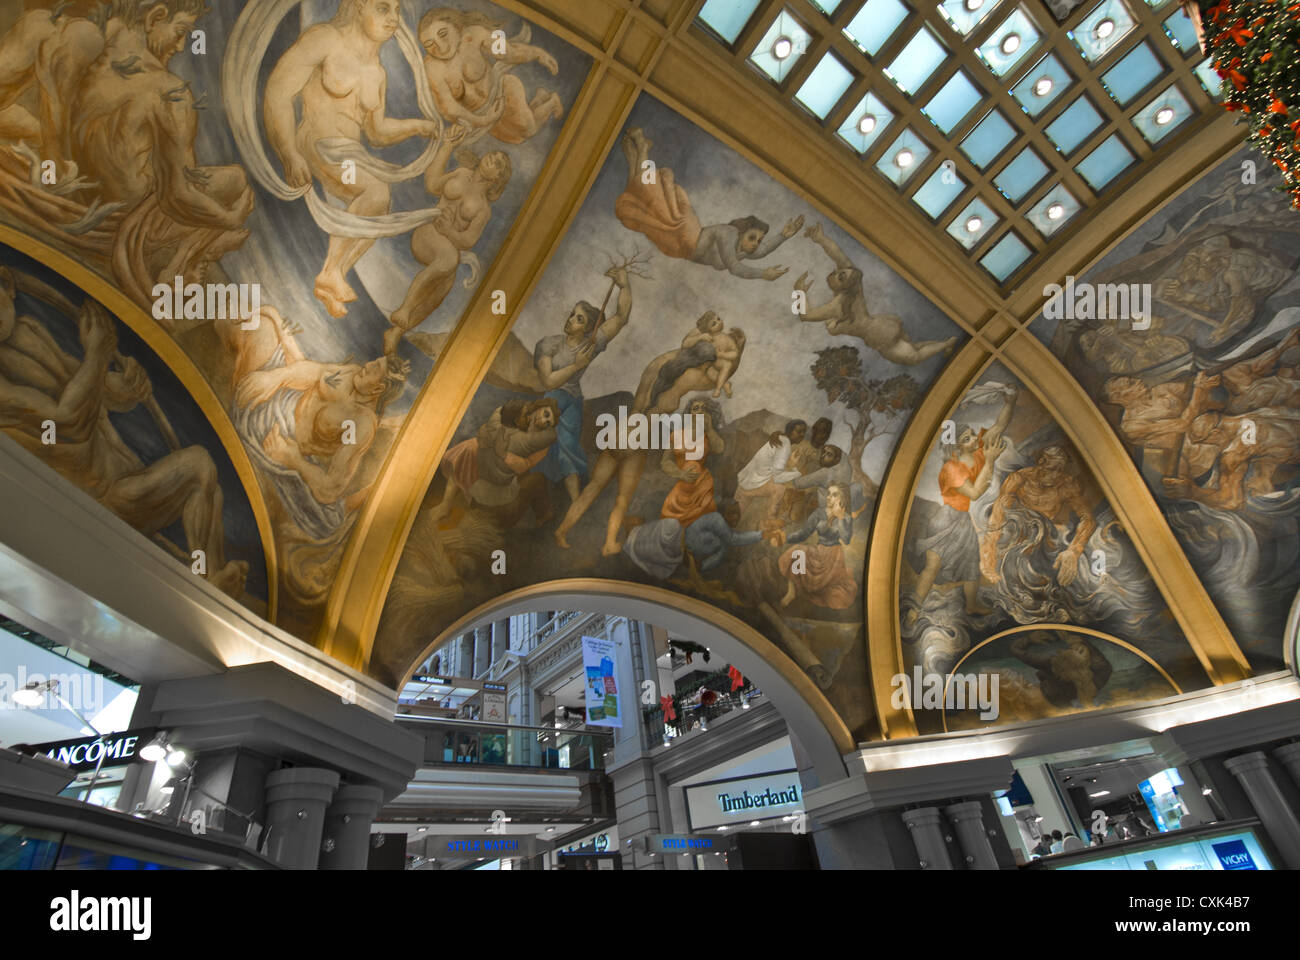 Galerias Pacifico, shopping center built in 1889, murals by  Argentine artists added in 1945, Buenos Aires, Argentina Stock Photo